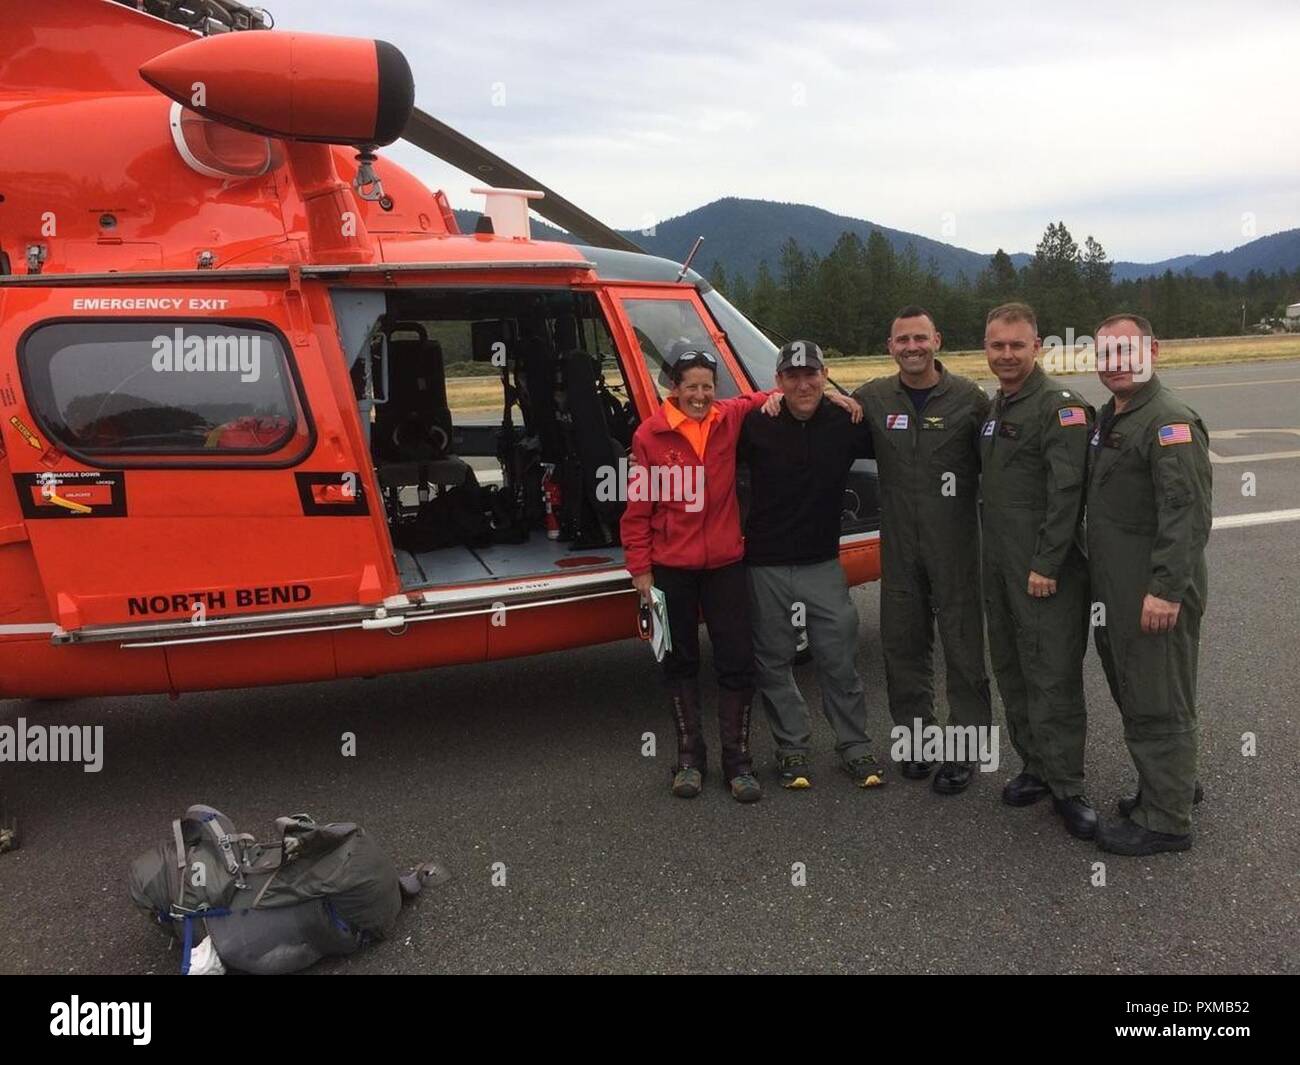 Anne McGloon, from the Josephine County Sheriff's Office and a rescued hiker stand with the aircrew of an MH-65 Dolphin helicopter from Sector North Bend at an airport in Grants Pass, Ore., June 14, 2017.    The hiker had been missing for 5 days in the Rogue River-Siskiyou National Forest after a planned 45-mile hike. Stock Photo